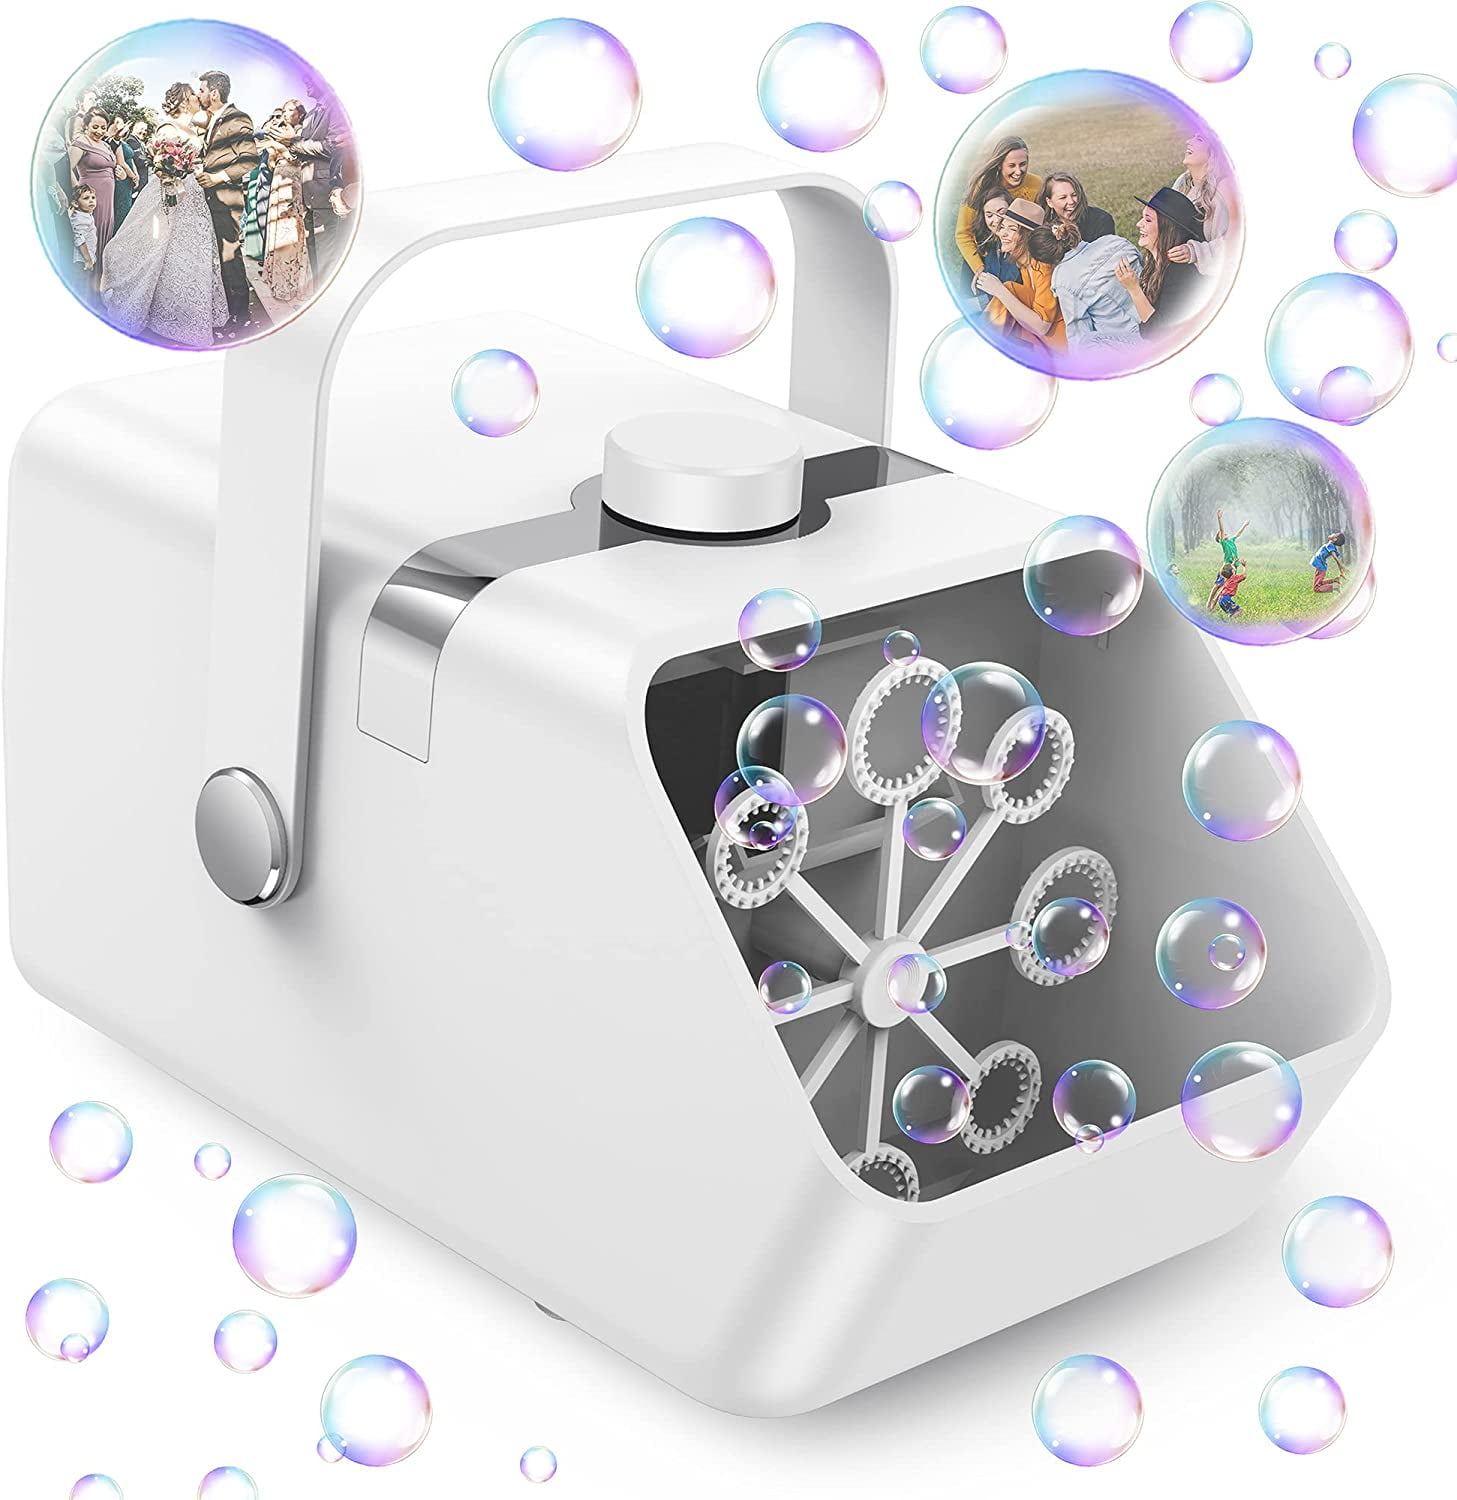 Portable Bubble Maker with 6000+ Bubbles/Min Rotation Button Electric Bubble Machine NTHJOYS Automatic Bubble Blower for Kids 2 Speeds Bubble Toys for Outdoor Indoor Party Wedding Birthday 